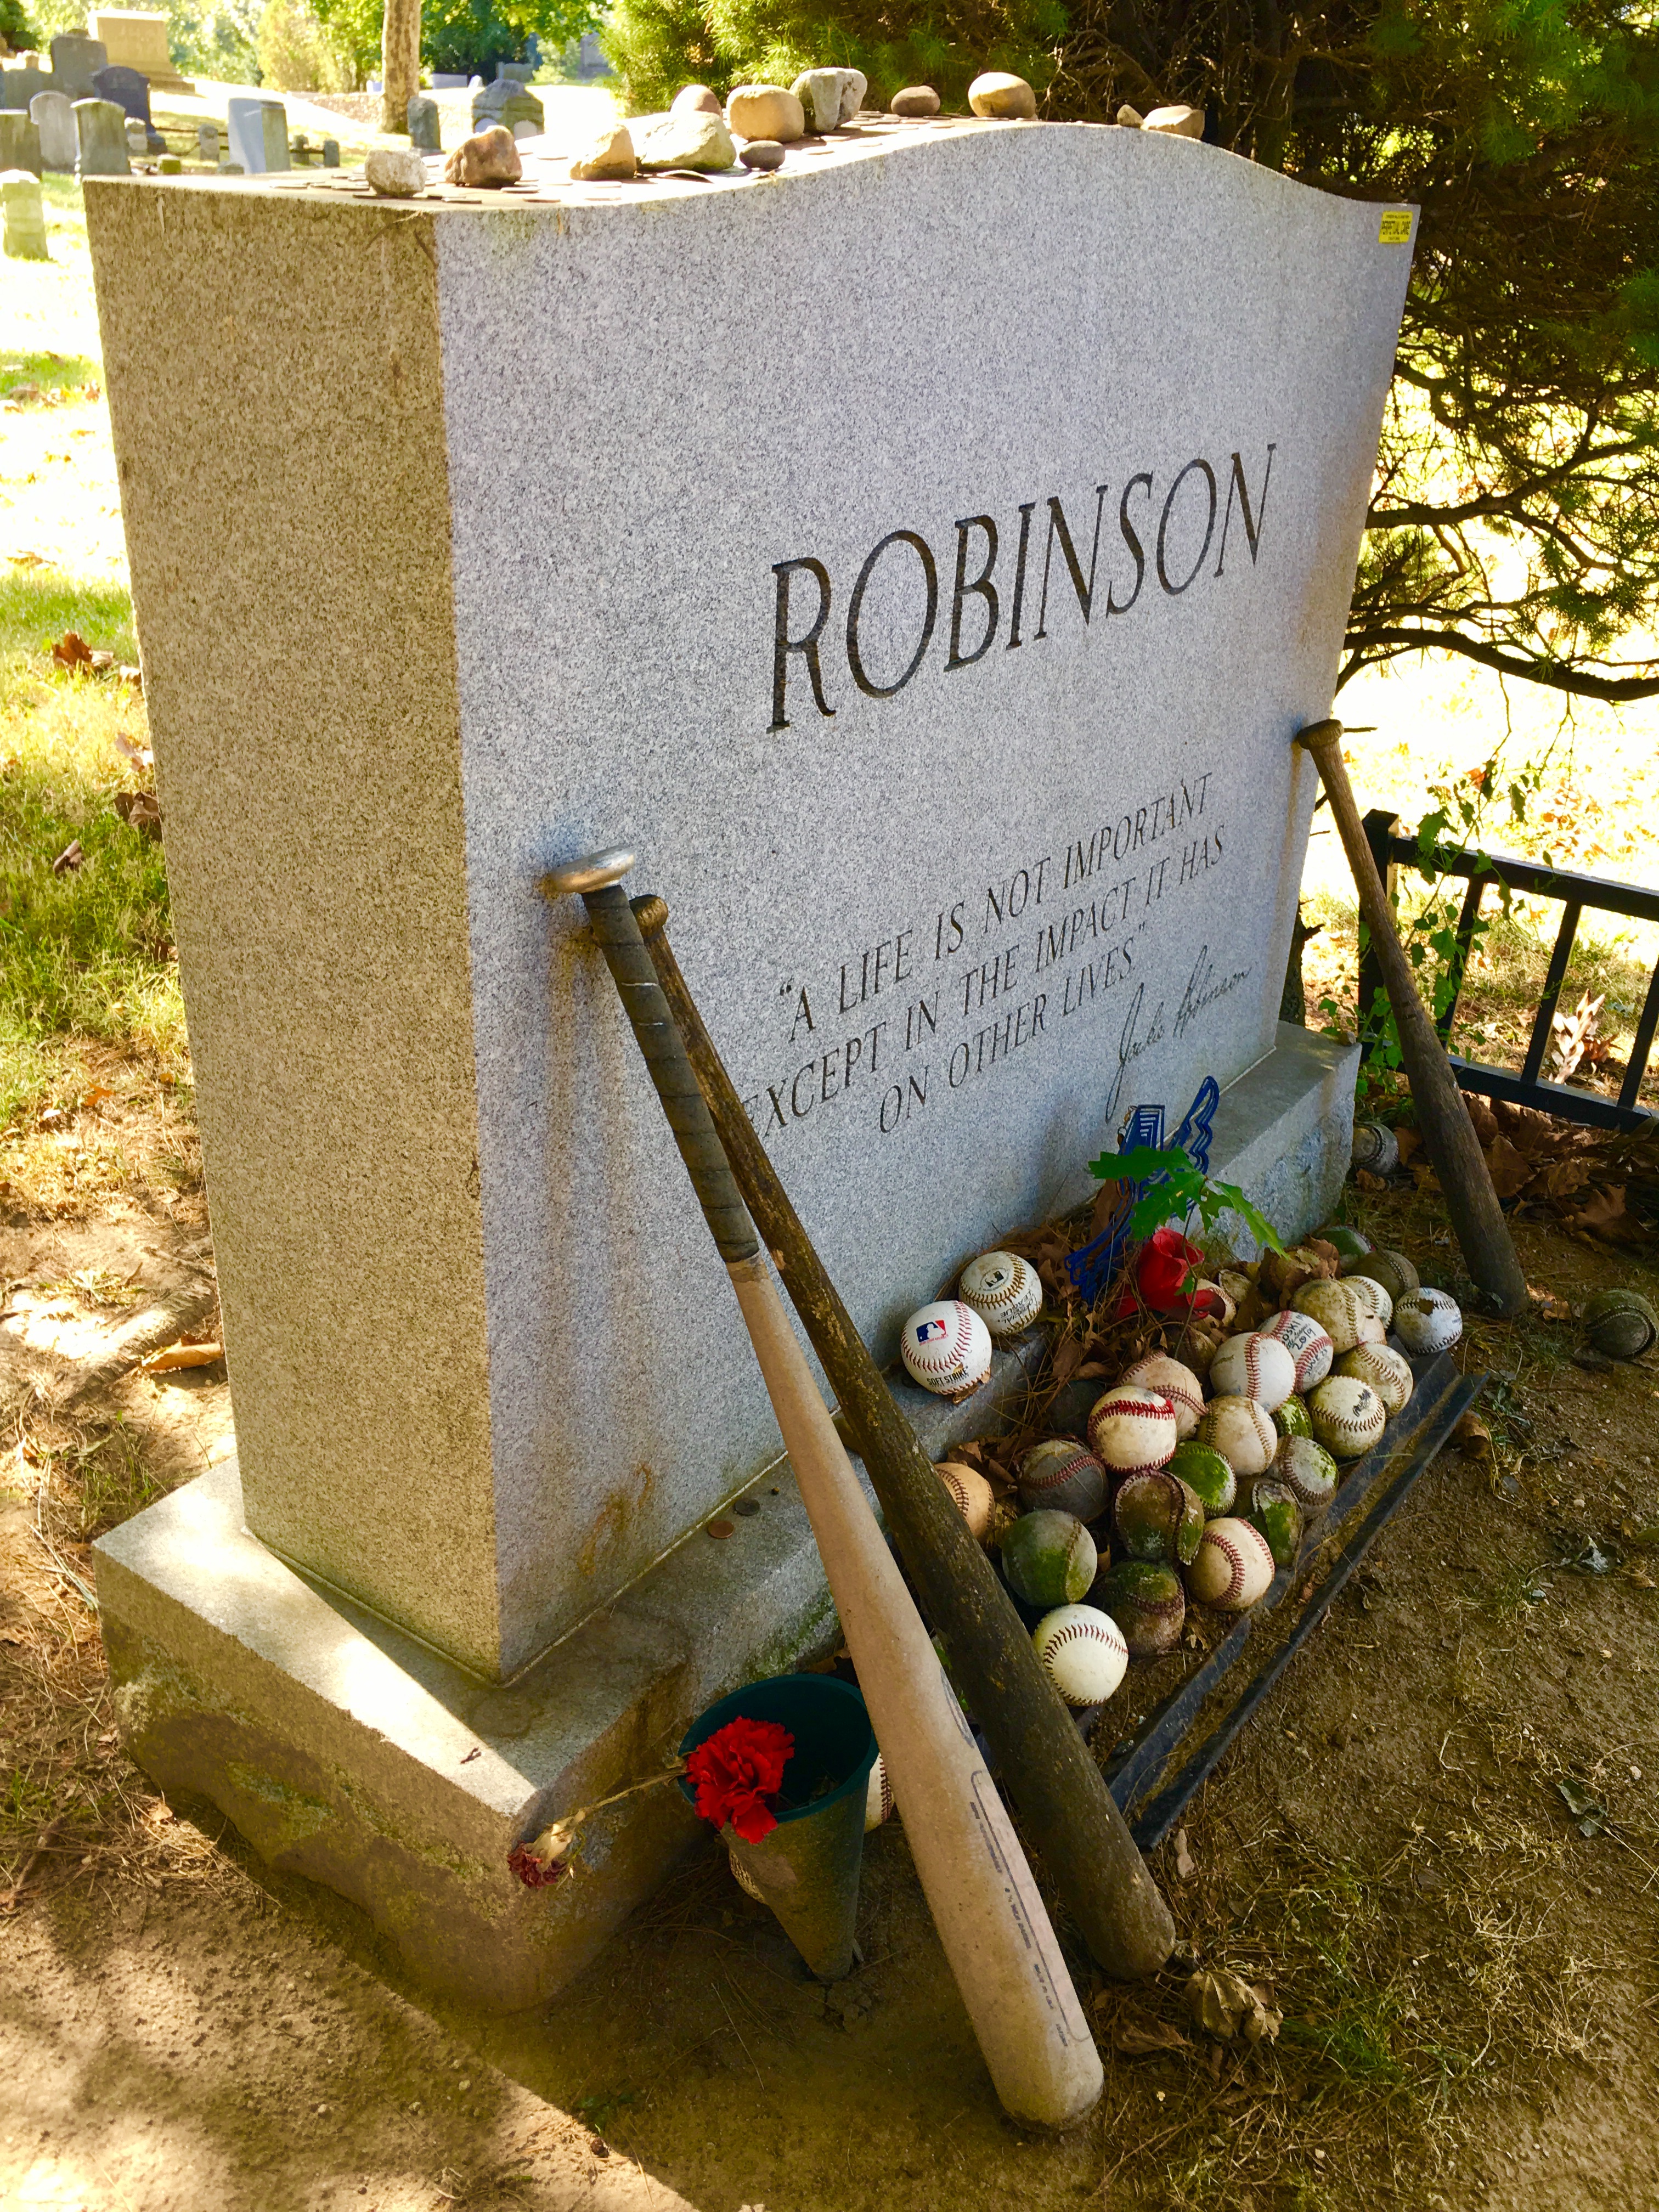 Jackie Robinson’s gravestone is an inspiring sight. Eagle photo by Lore Croghan